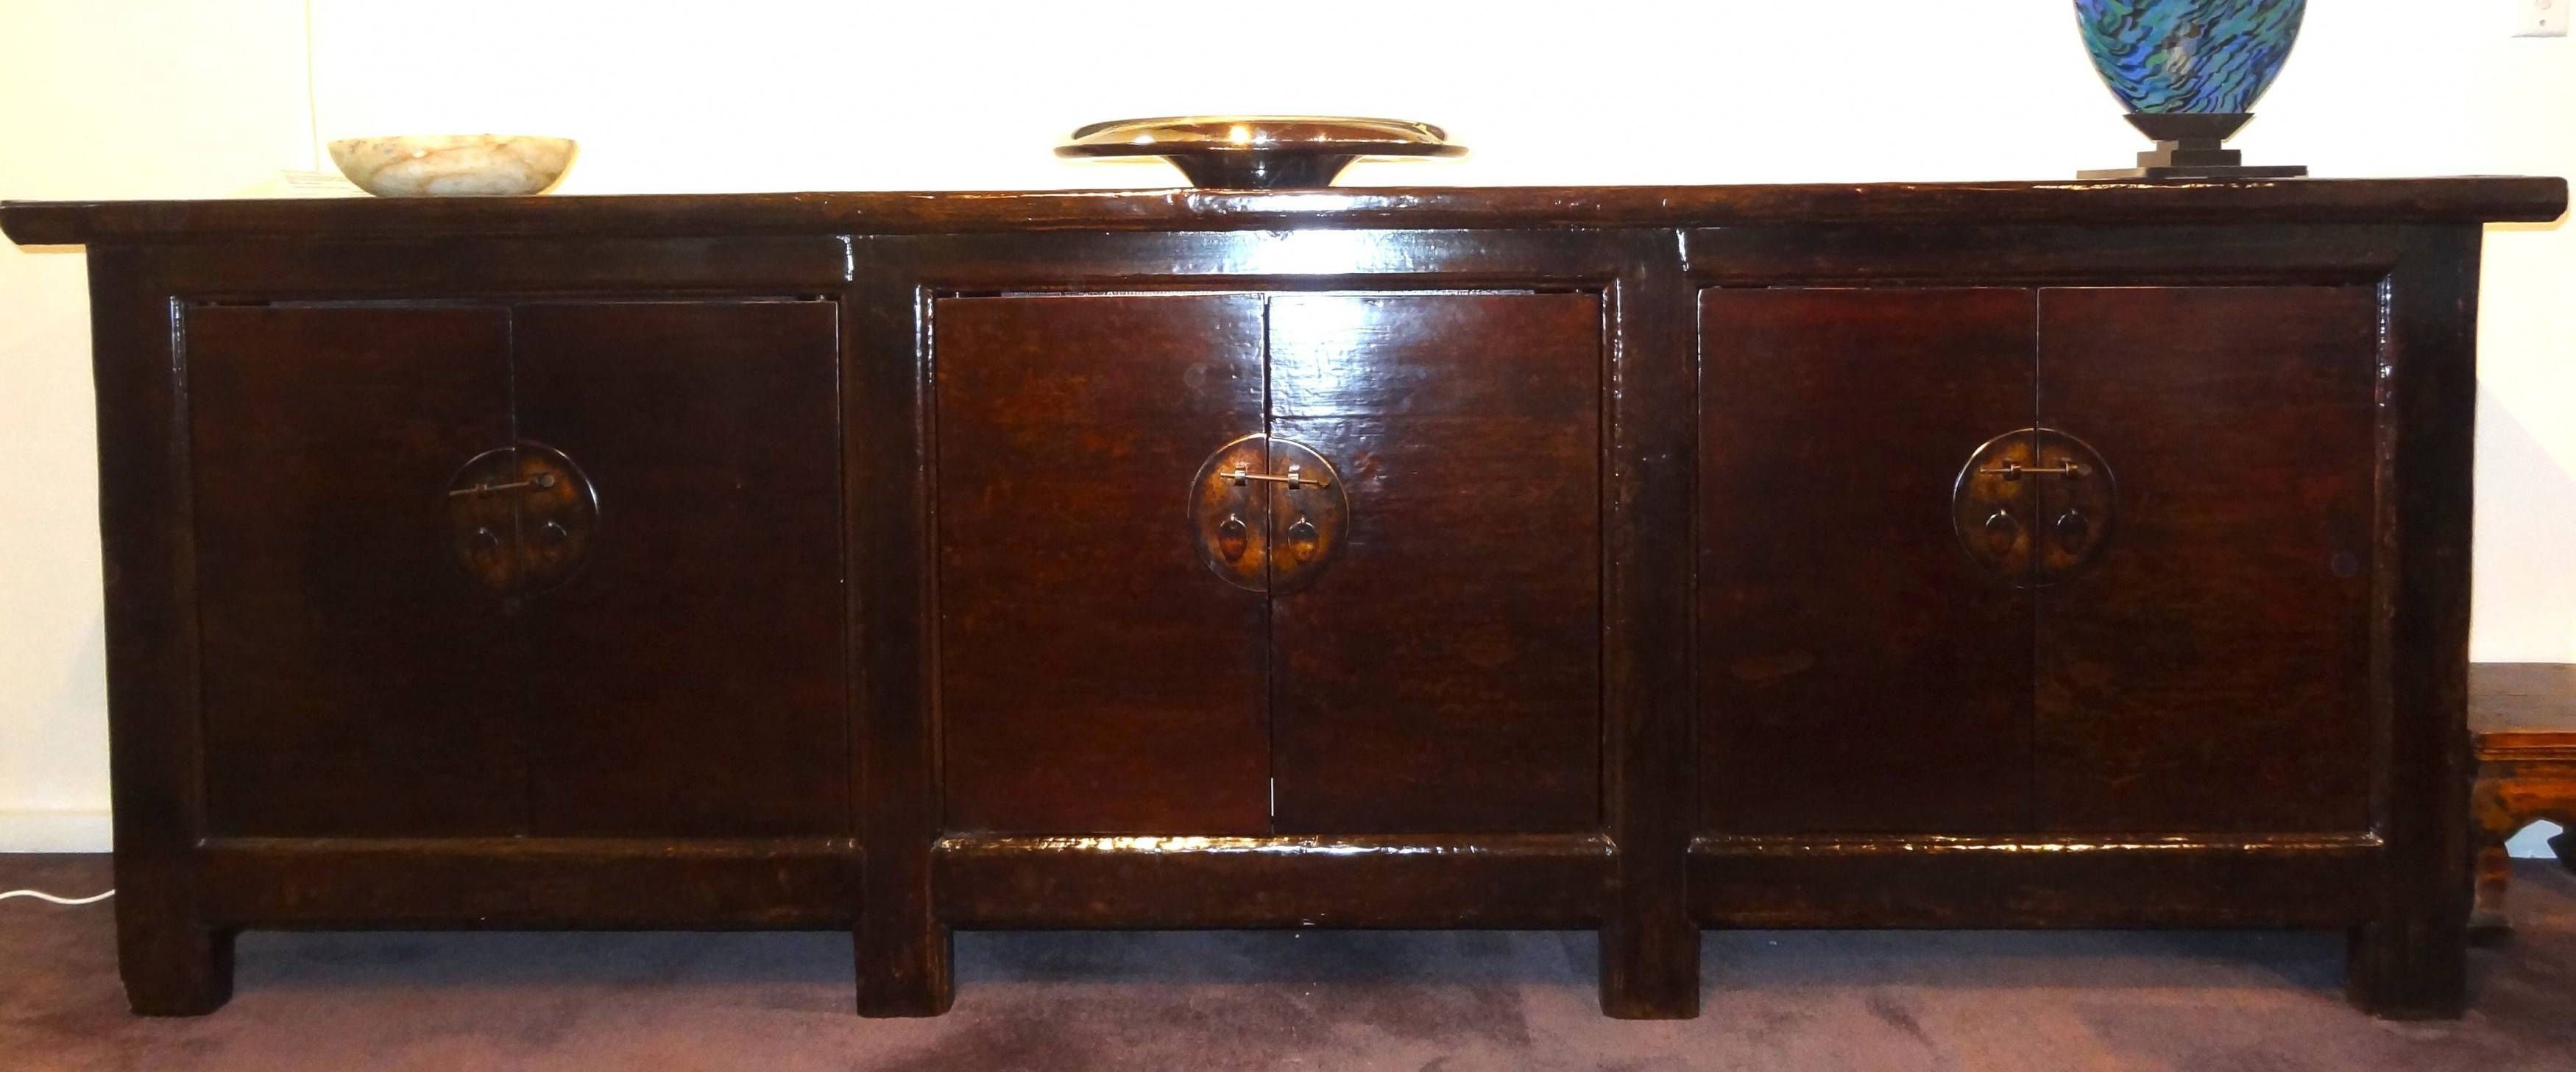 Antique Sideboards | Gallery Categories | Aptos Cruz Intended For Chinese Sideboards (Photo 9 of 20)